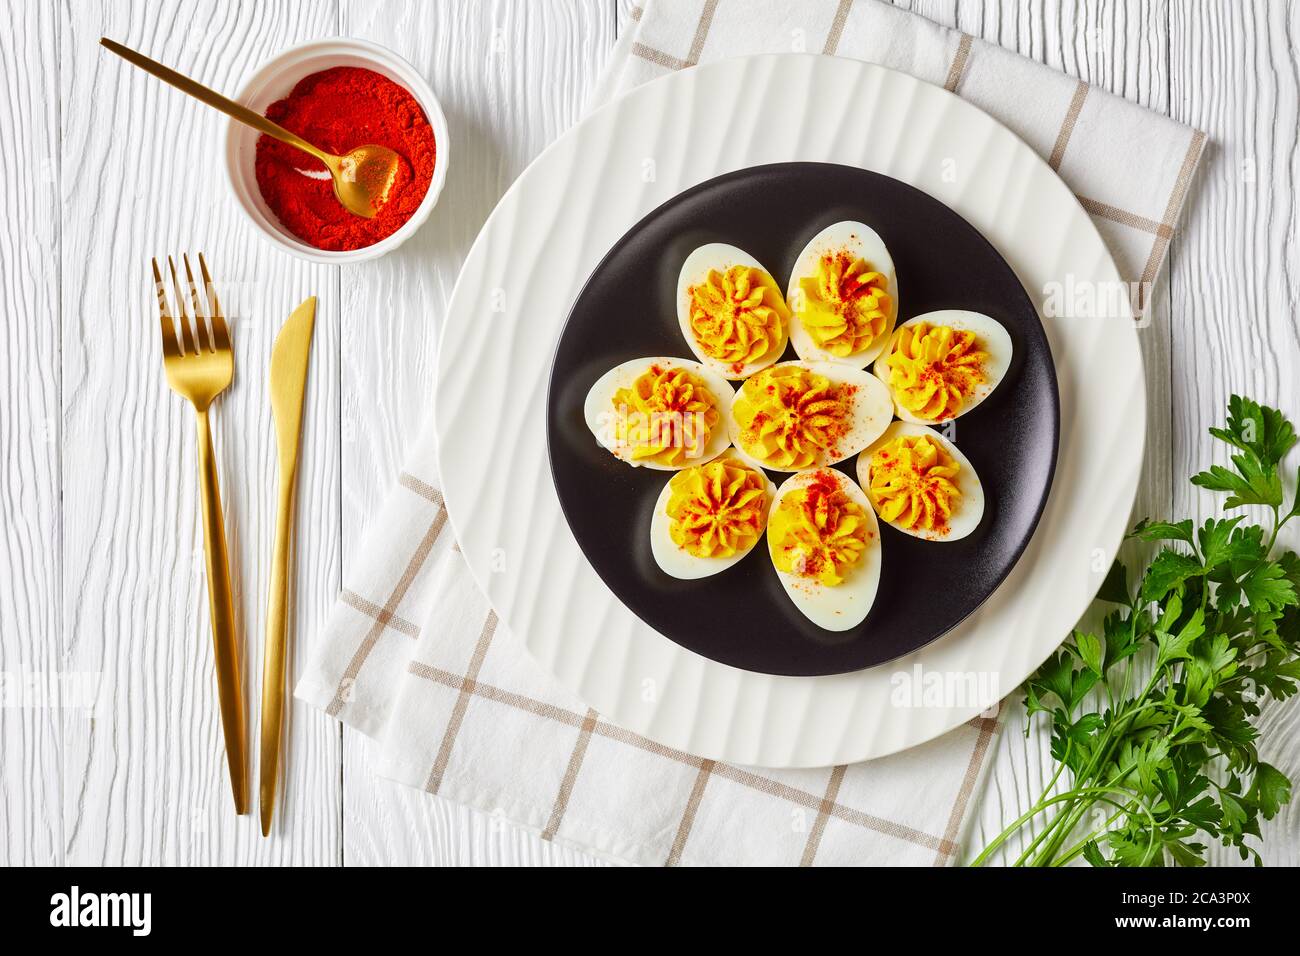 Festive appetizer: devilled eggs with a mix of egg yolks, sriracha sauce, mayonnaise, apple cider vinegar sprinkled with smoked paprika on a plate on Stock Photo